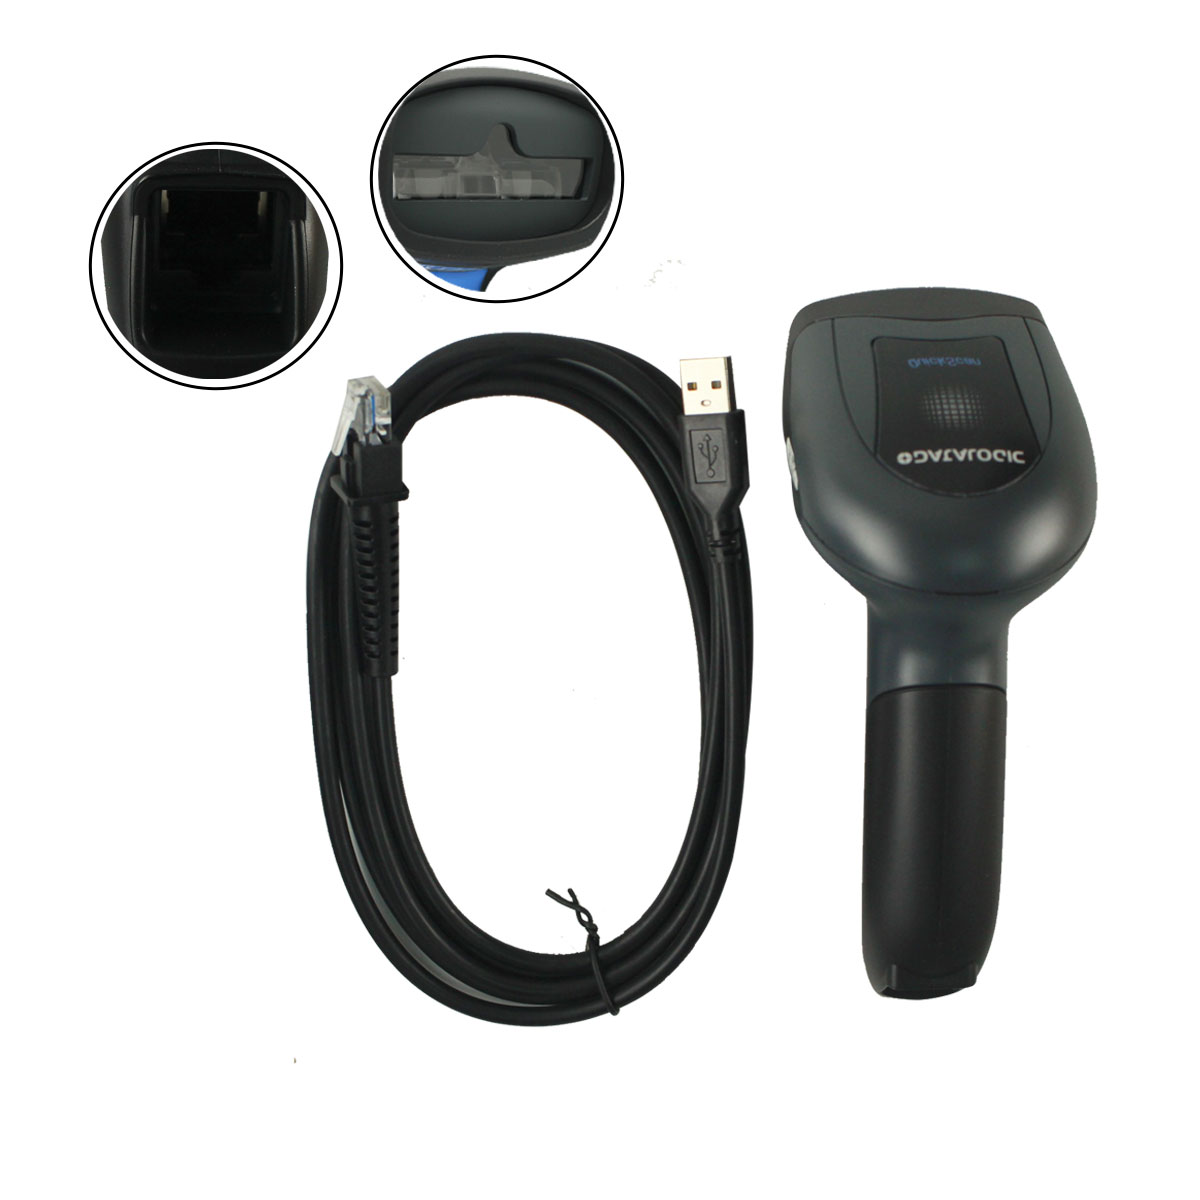 1 - d scanner QD2131 with wire and support